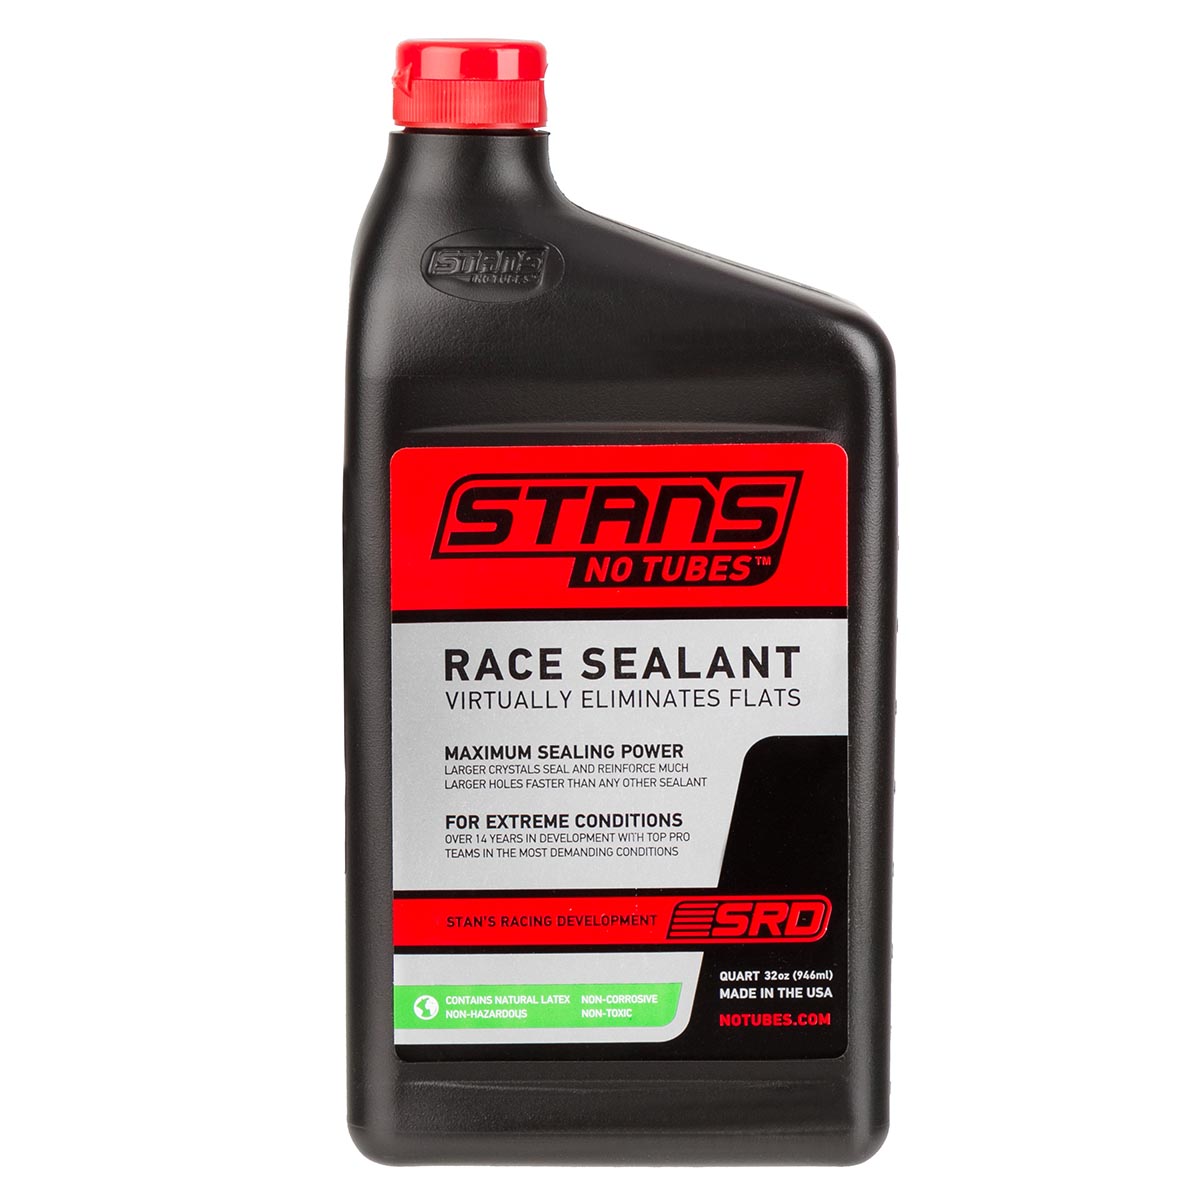 Stan's NoTubes Tubeless Tire Sealant Race For Up To 16 Tires